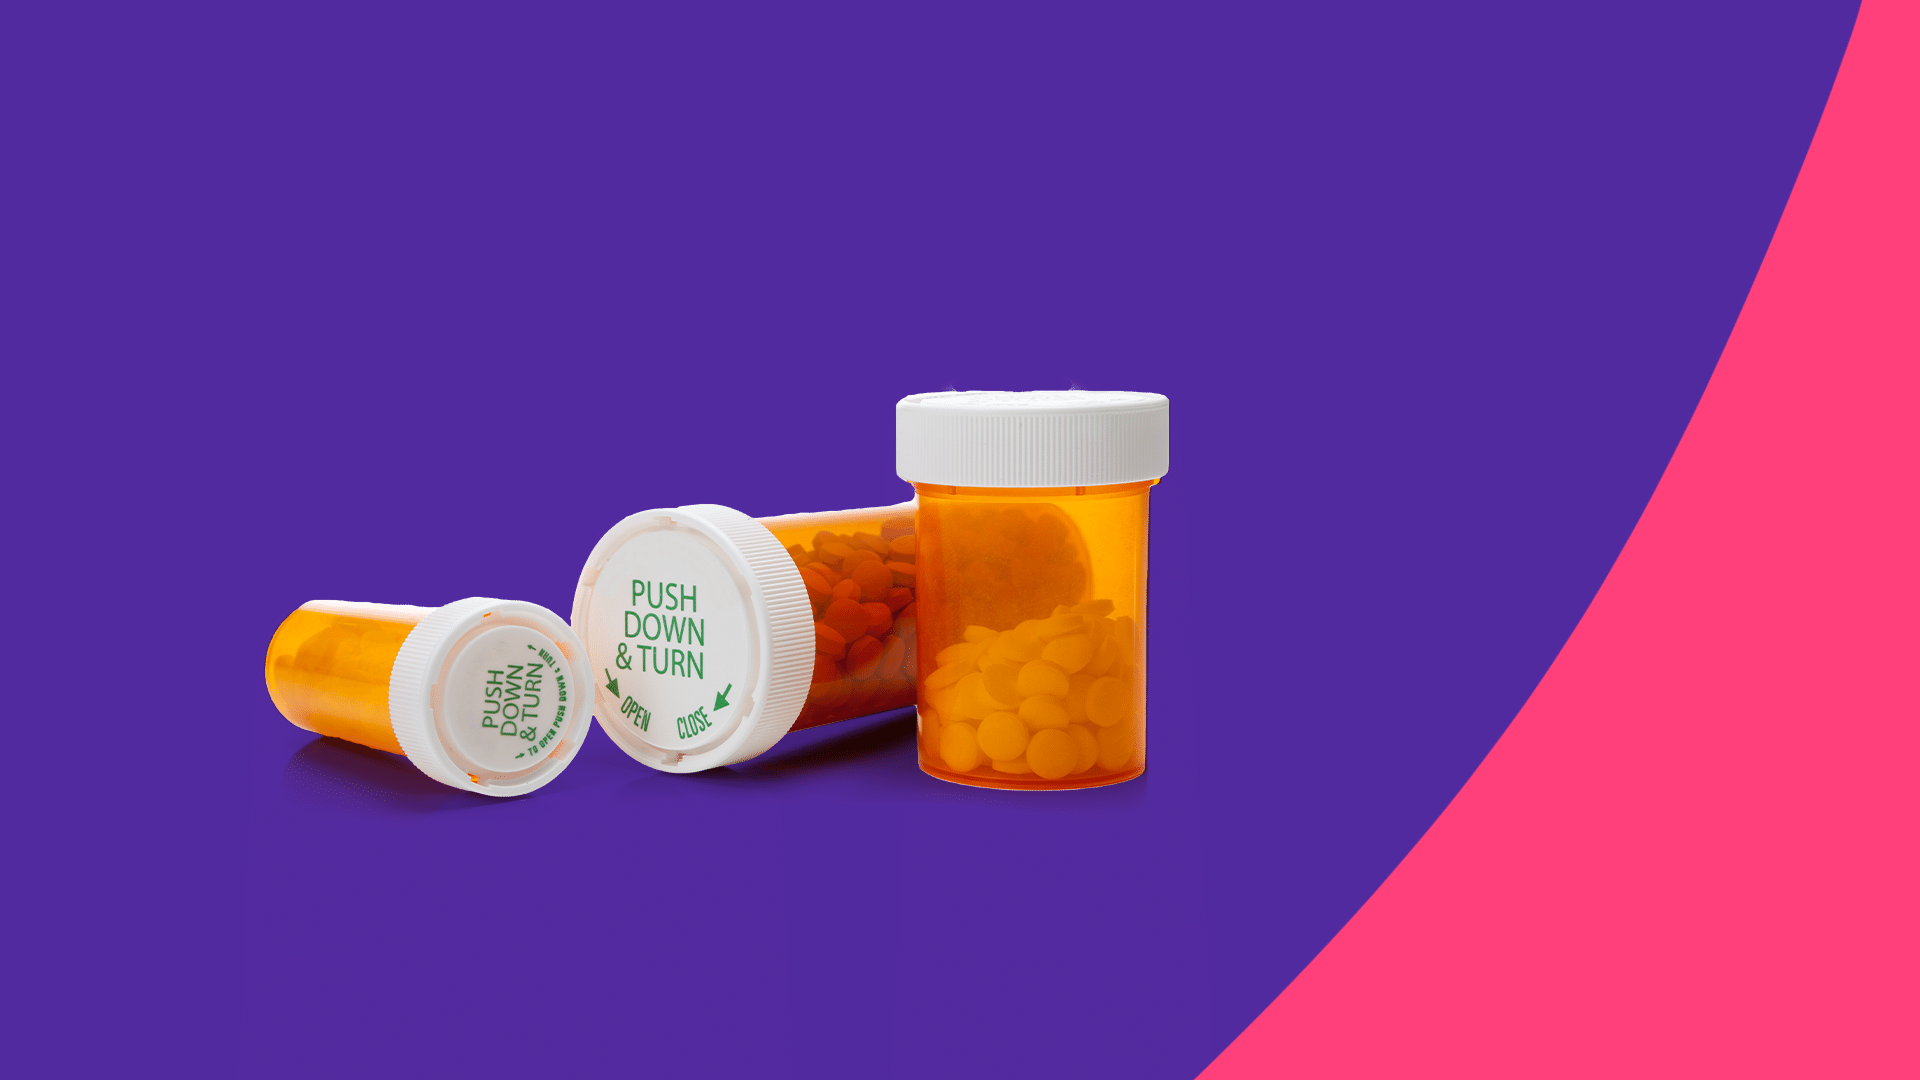 Rx pill bottles: How much does Entresto cost without insurance?